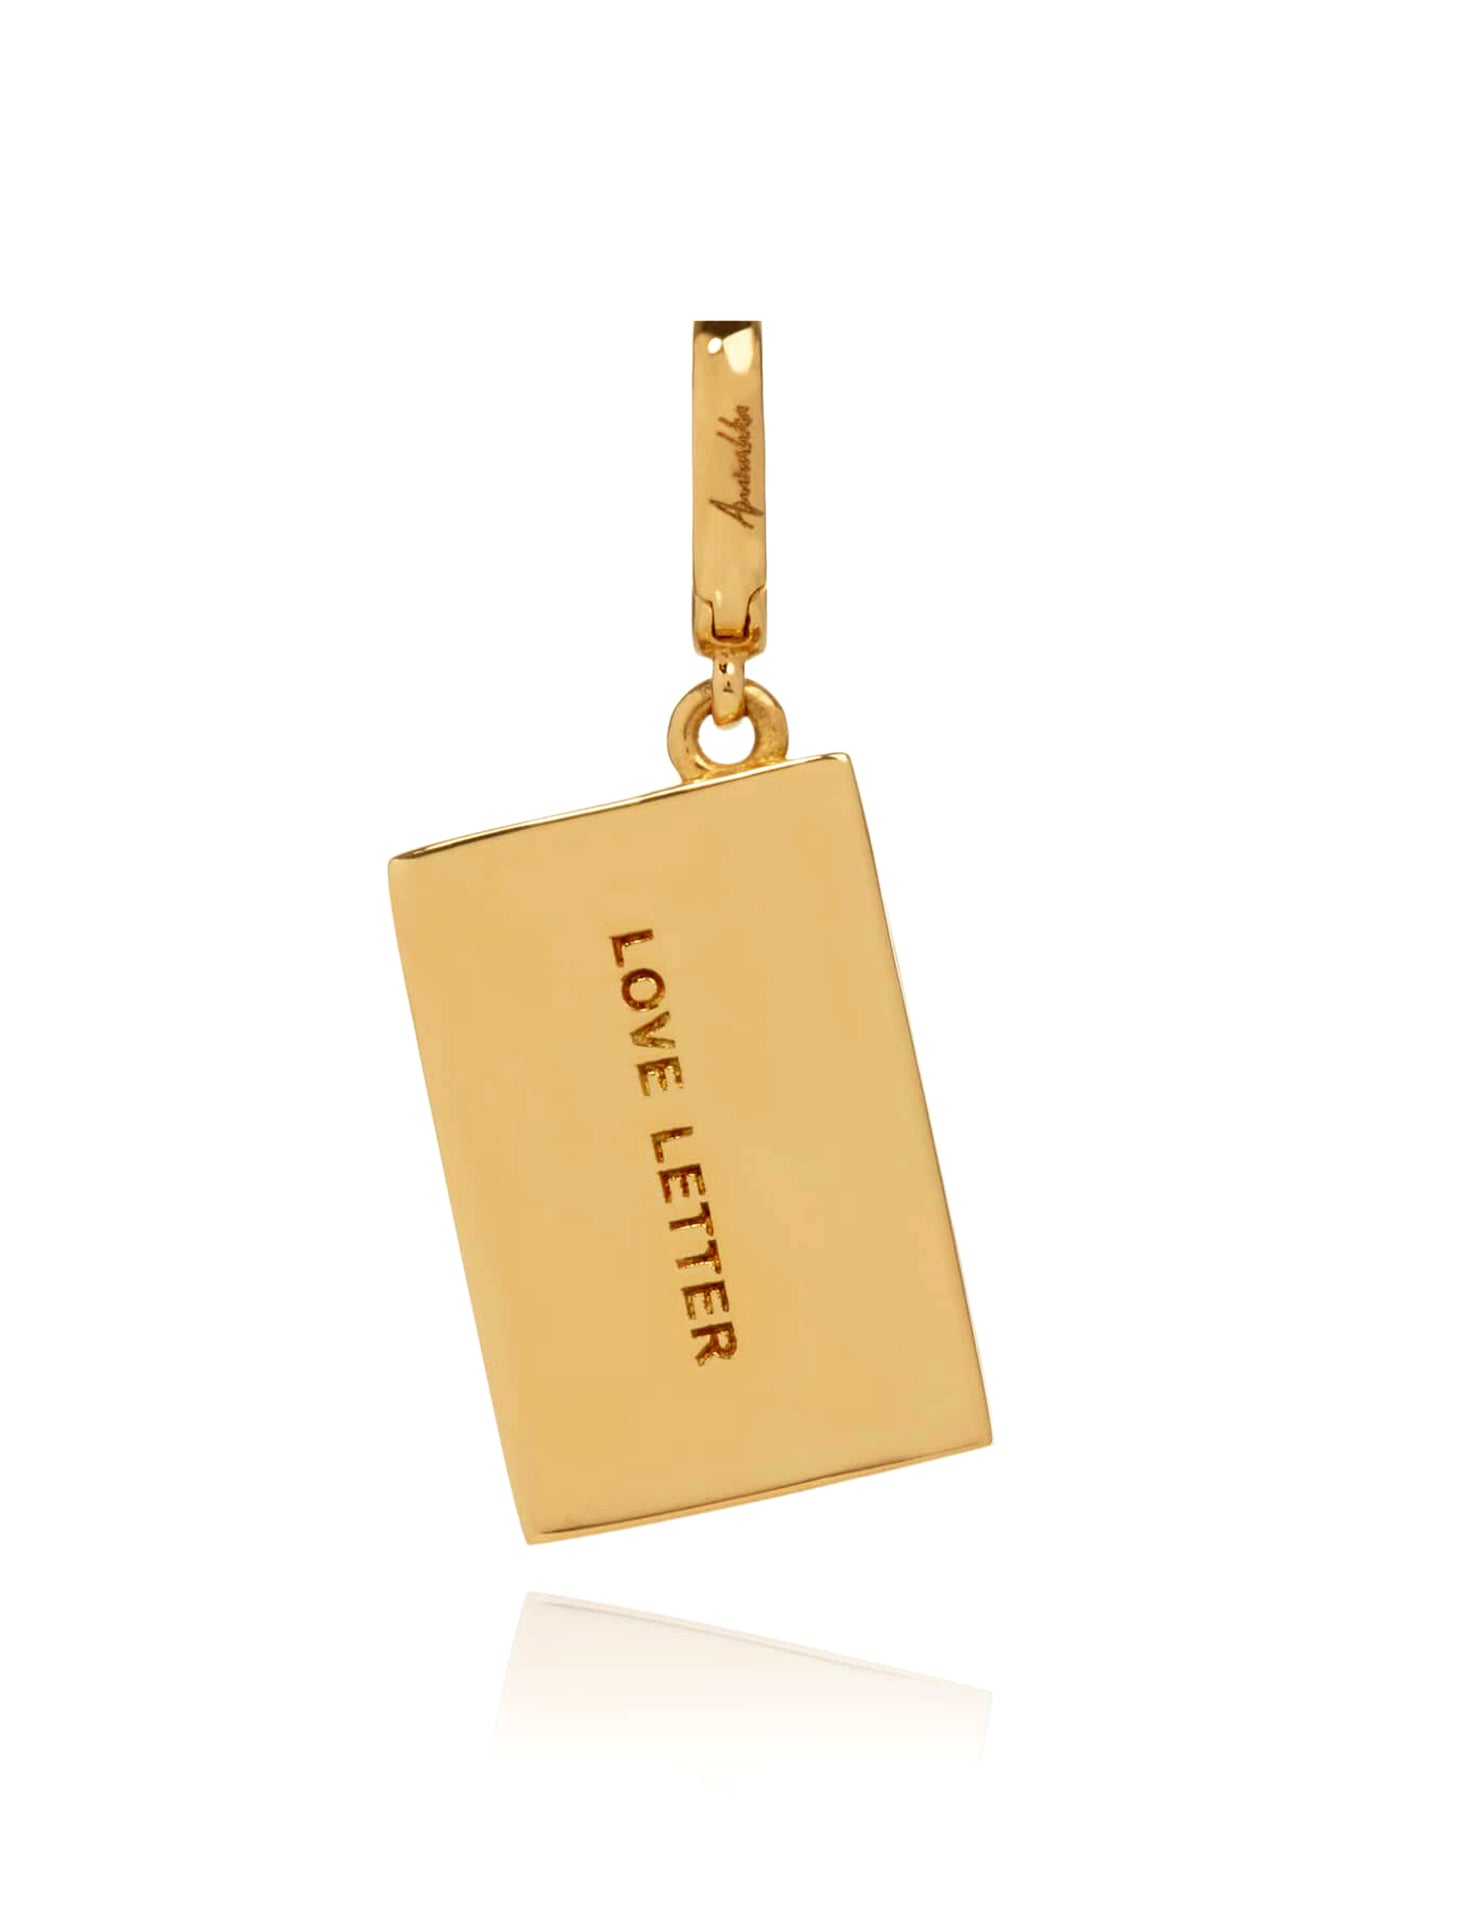 Love Letter, 18K Yellow Gold Charm